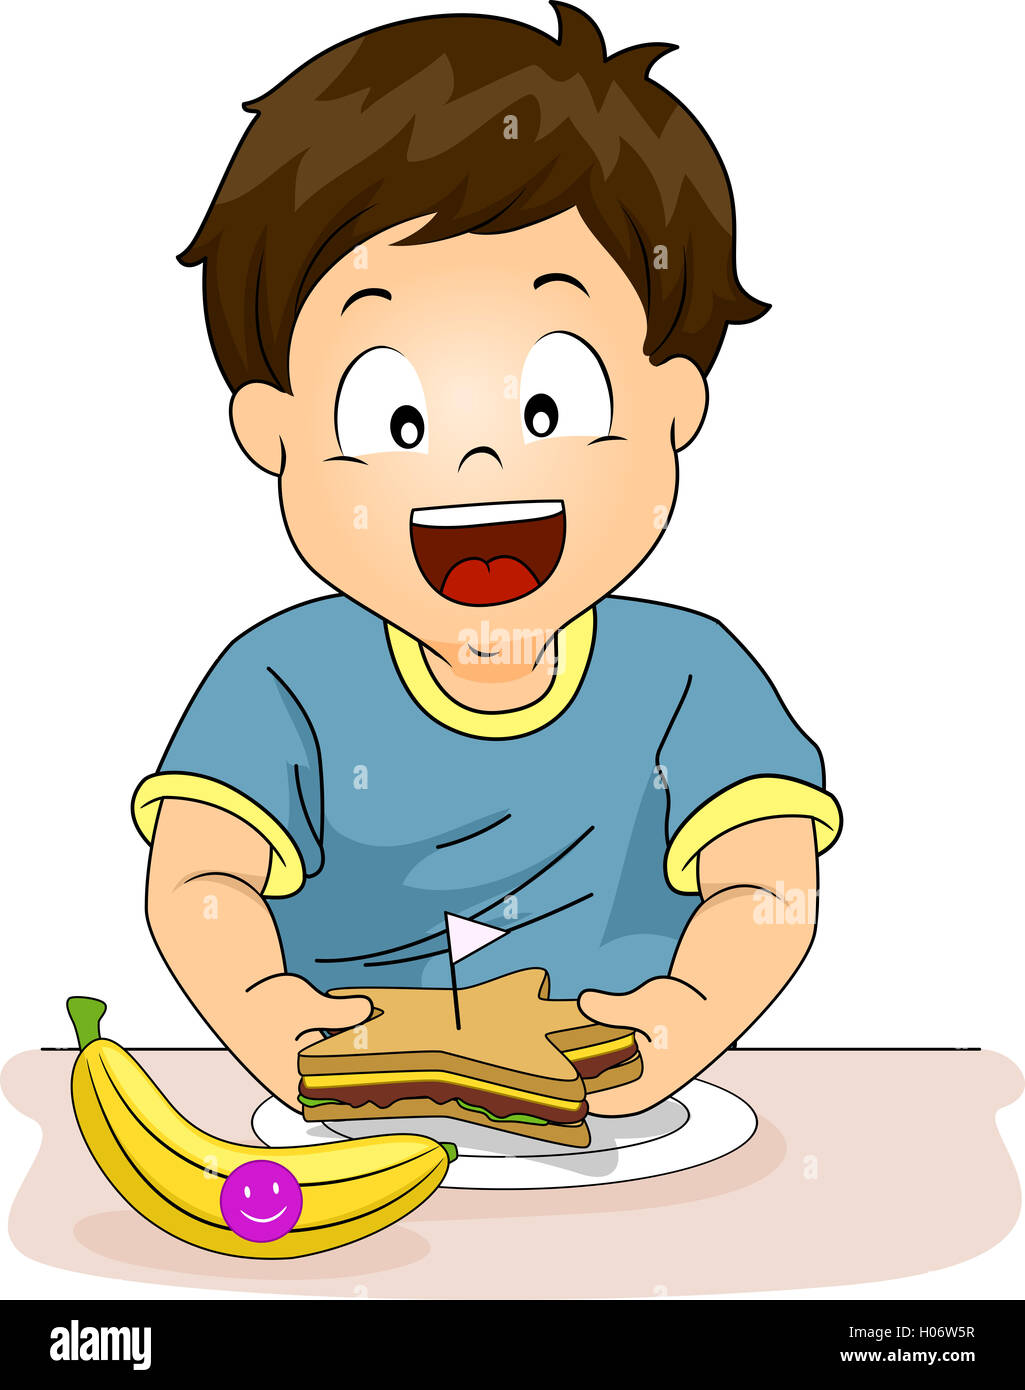 Illustration of a Little Boy Preparing a Healthy Snack Stock Photo - Alamy